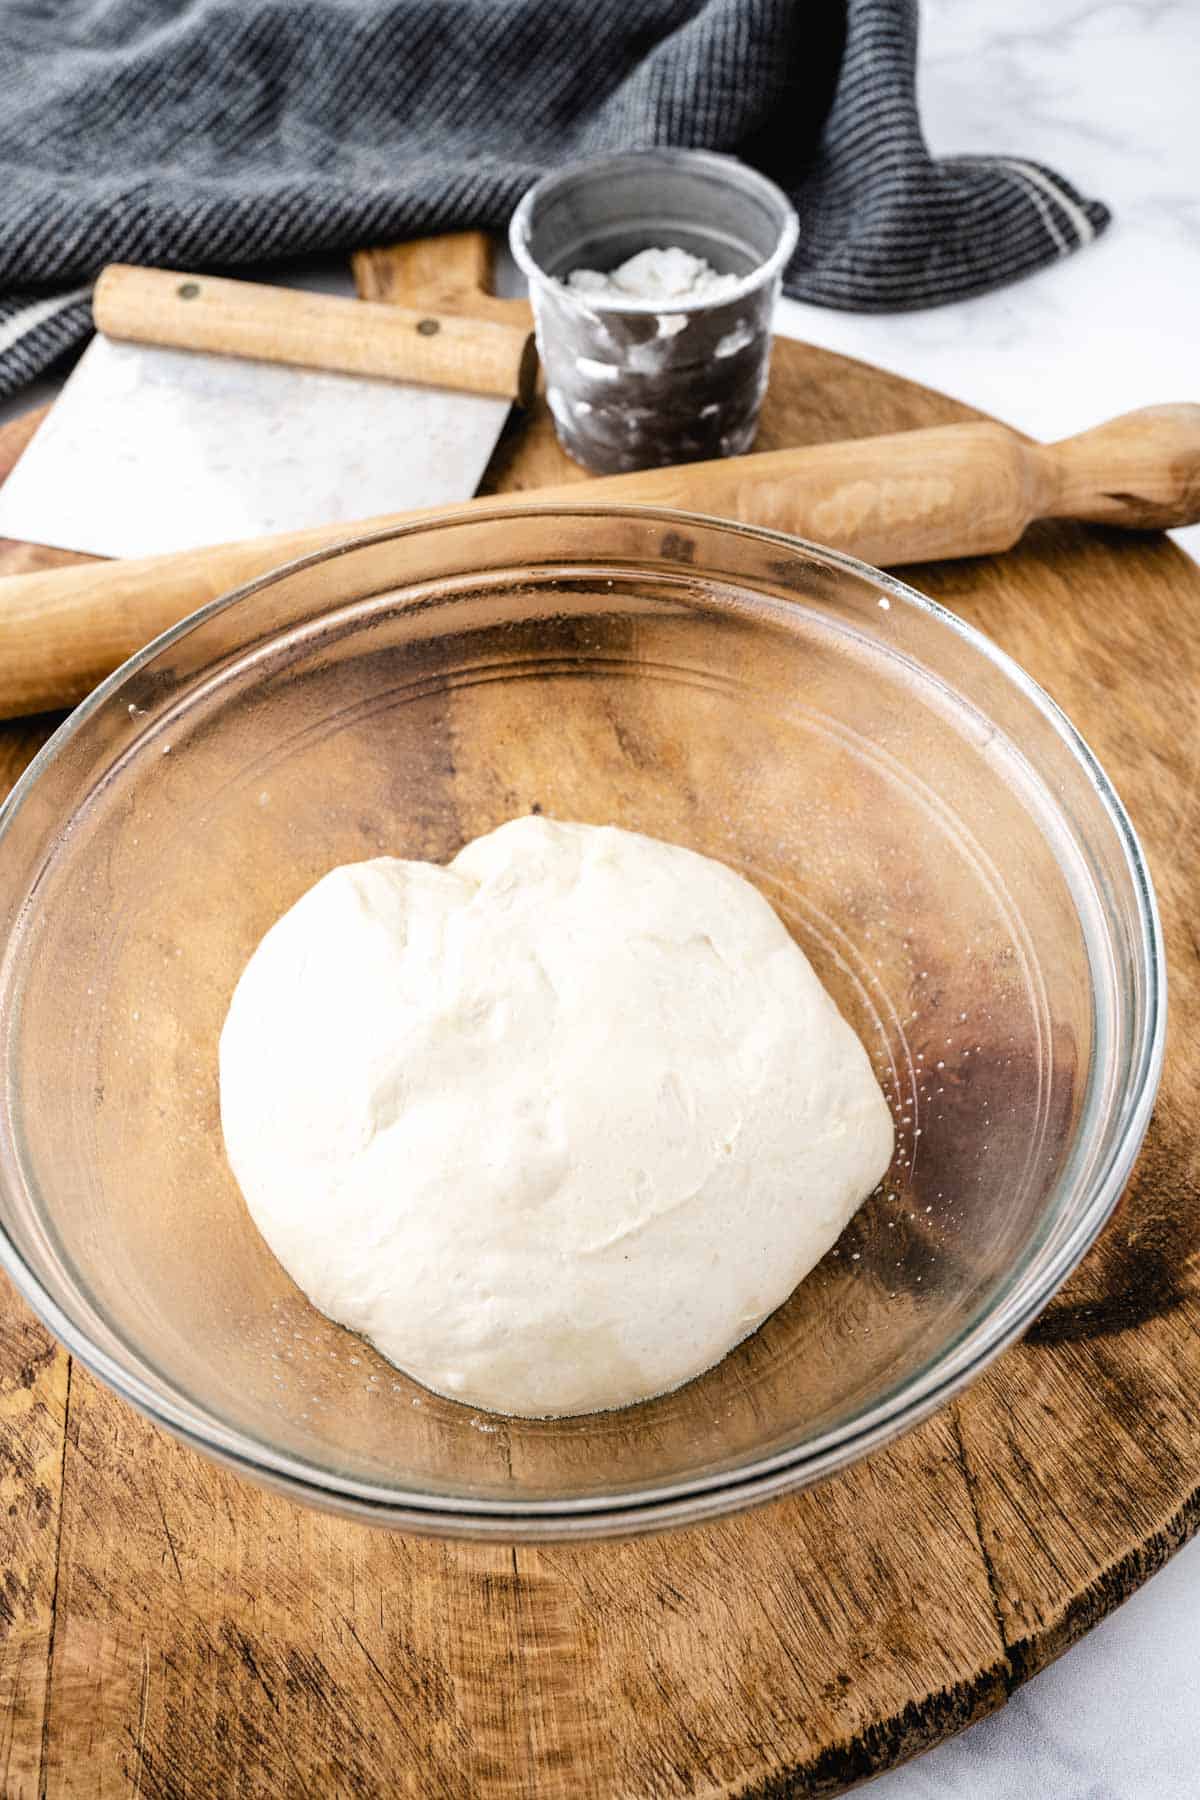 A ball of pizza dough in an oiled glass bowl set on a wooden tray.